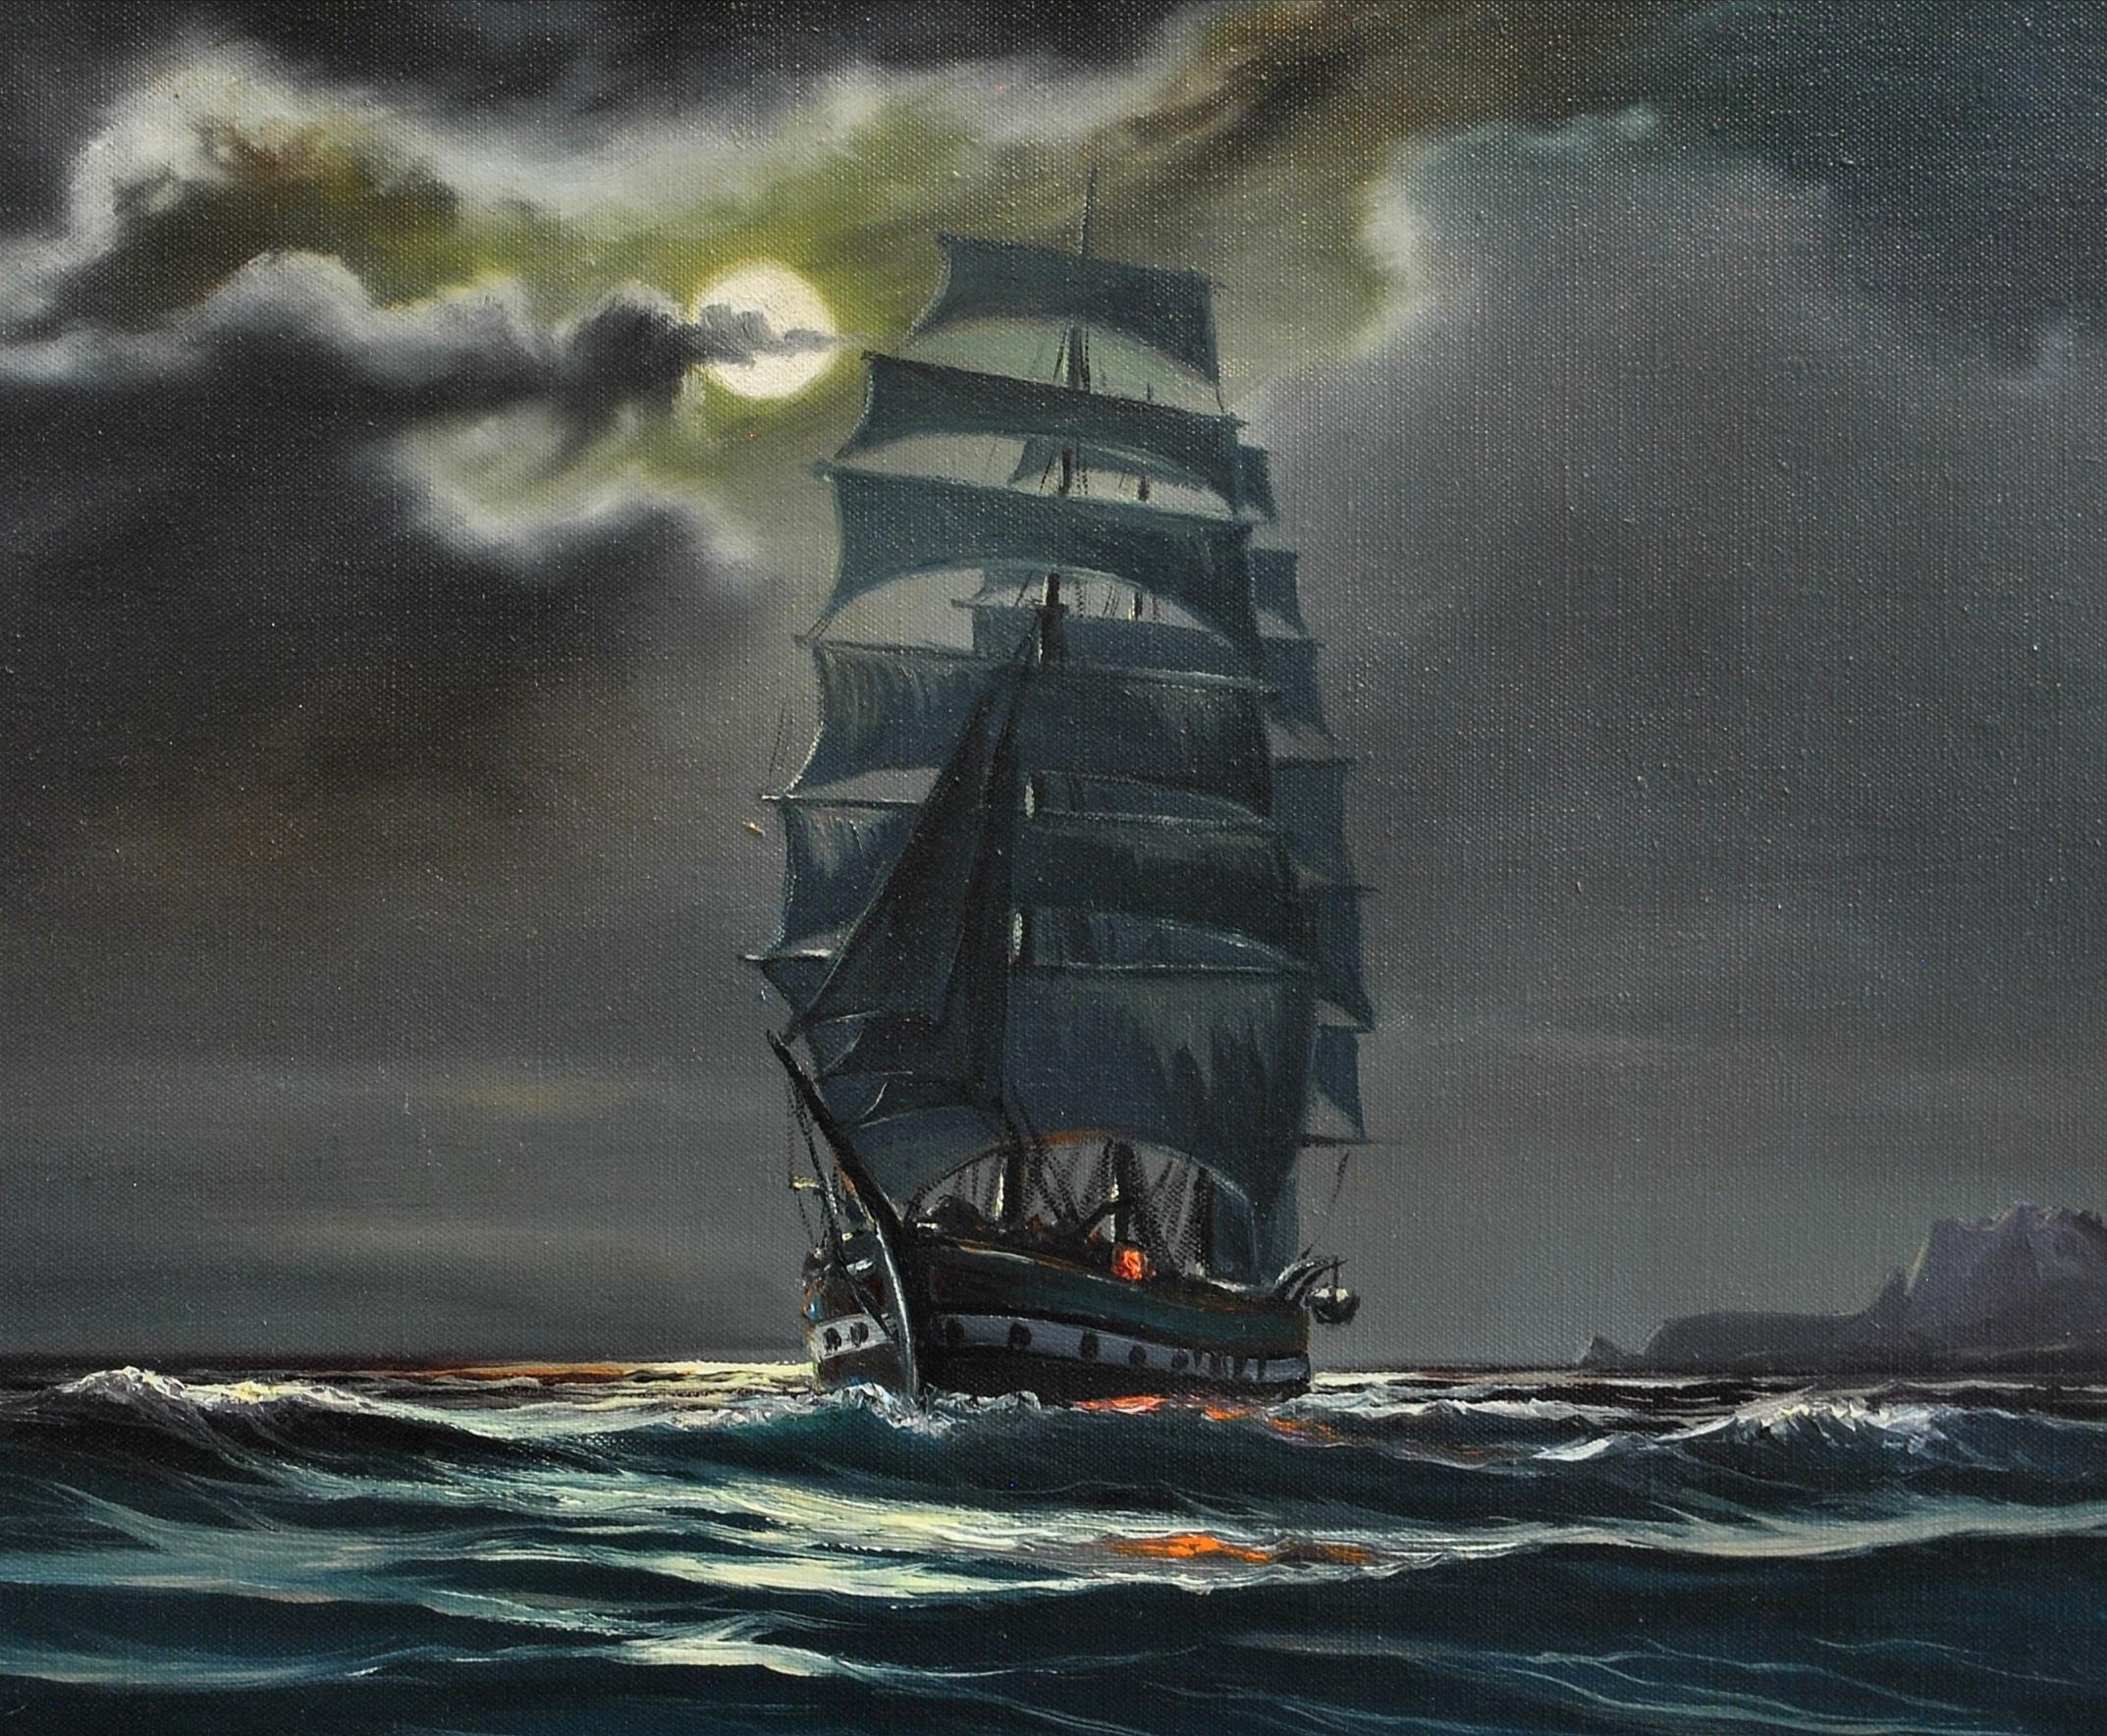 This atmospheric 1960's oil on canvas by Arnold Beardsley depicts The Hesperus at sea under a moonlit sky.

Hesperus was an iron-hulled, three-masted, passenger clipper ship that was built in Scotland in 1874 and scrapped in Italy in 1923. She was